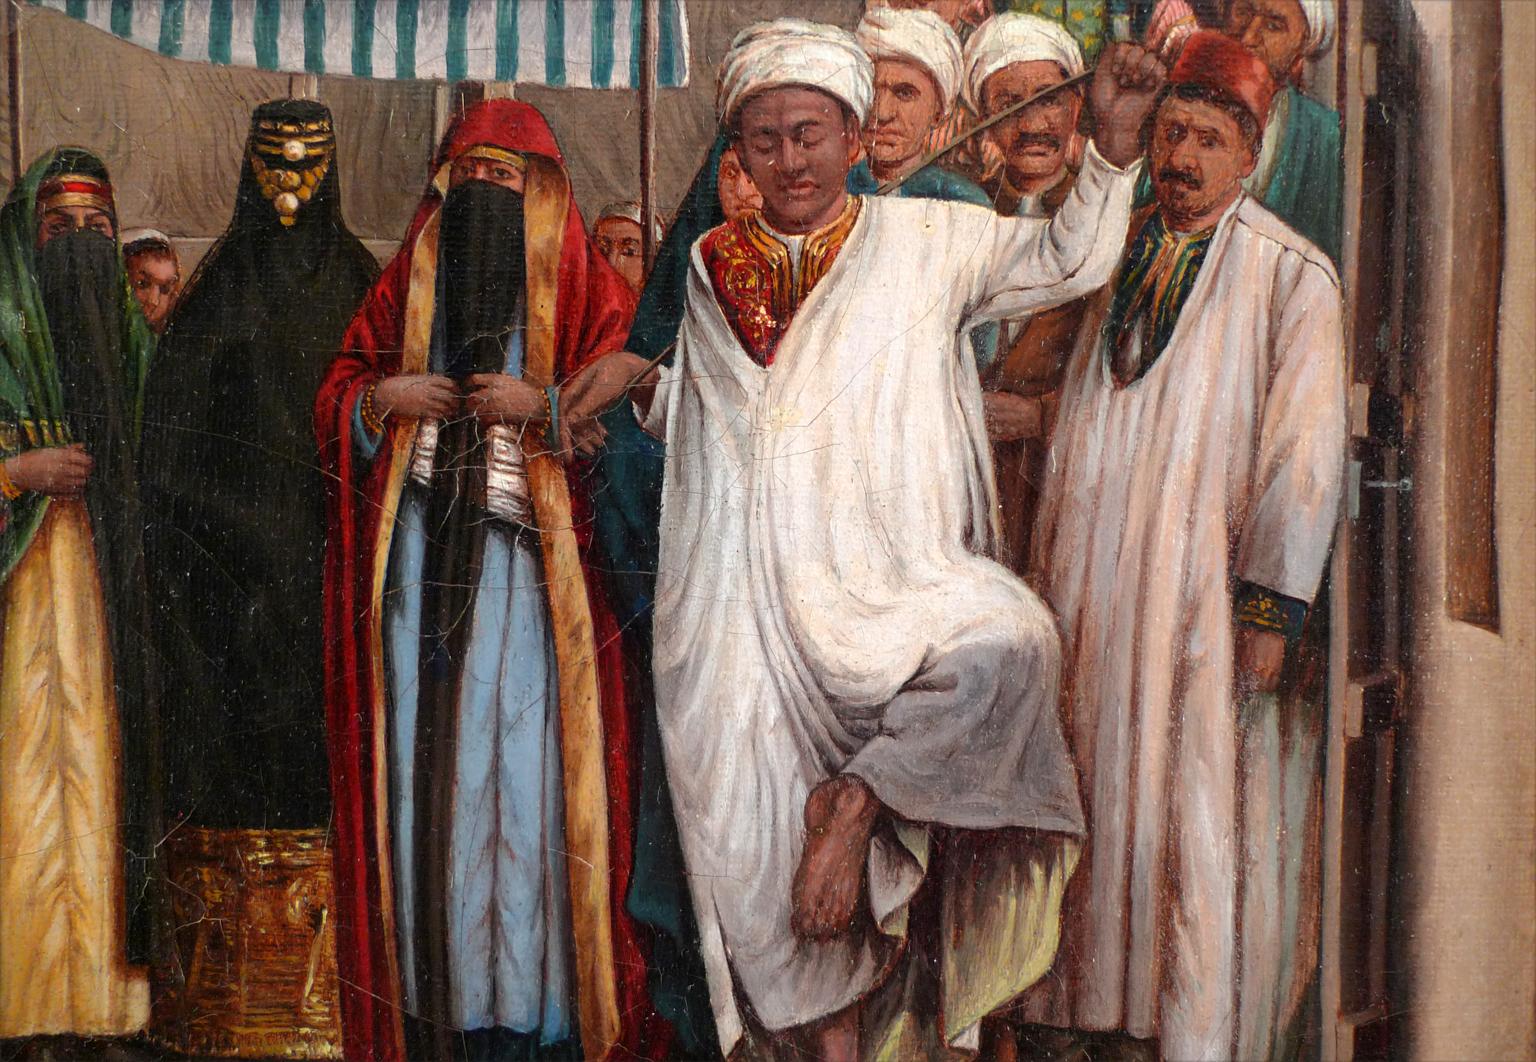 MOHAMED ALI NAQASH
Iraqi, 19th - 20th Century
WEDDING CEREMONY IN TEBRIZ
signed in arabic and inscribed Mohamed Ali al-Naqash / Tabrizi lower right
oil on canvas
11 x 13-1/4 inches (28 x 34 cm.)
framed: 17 x 19-1/2 inches (43 x 49